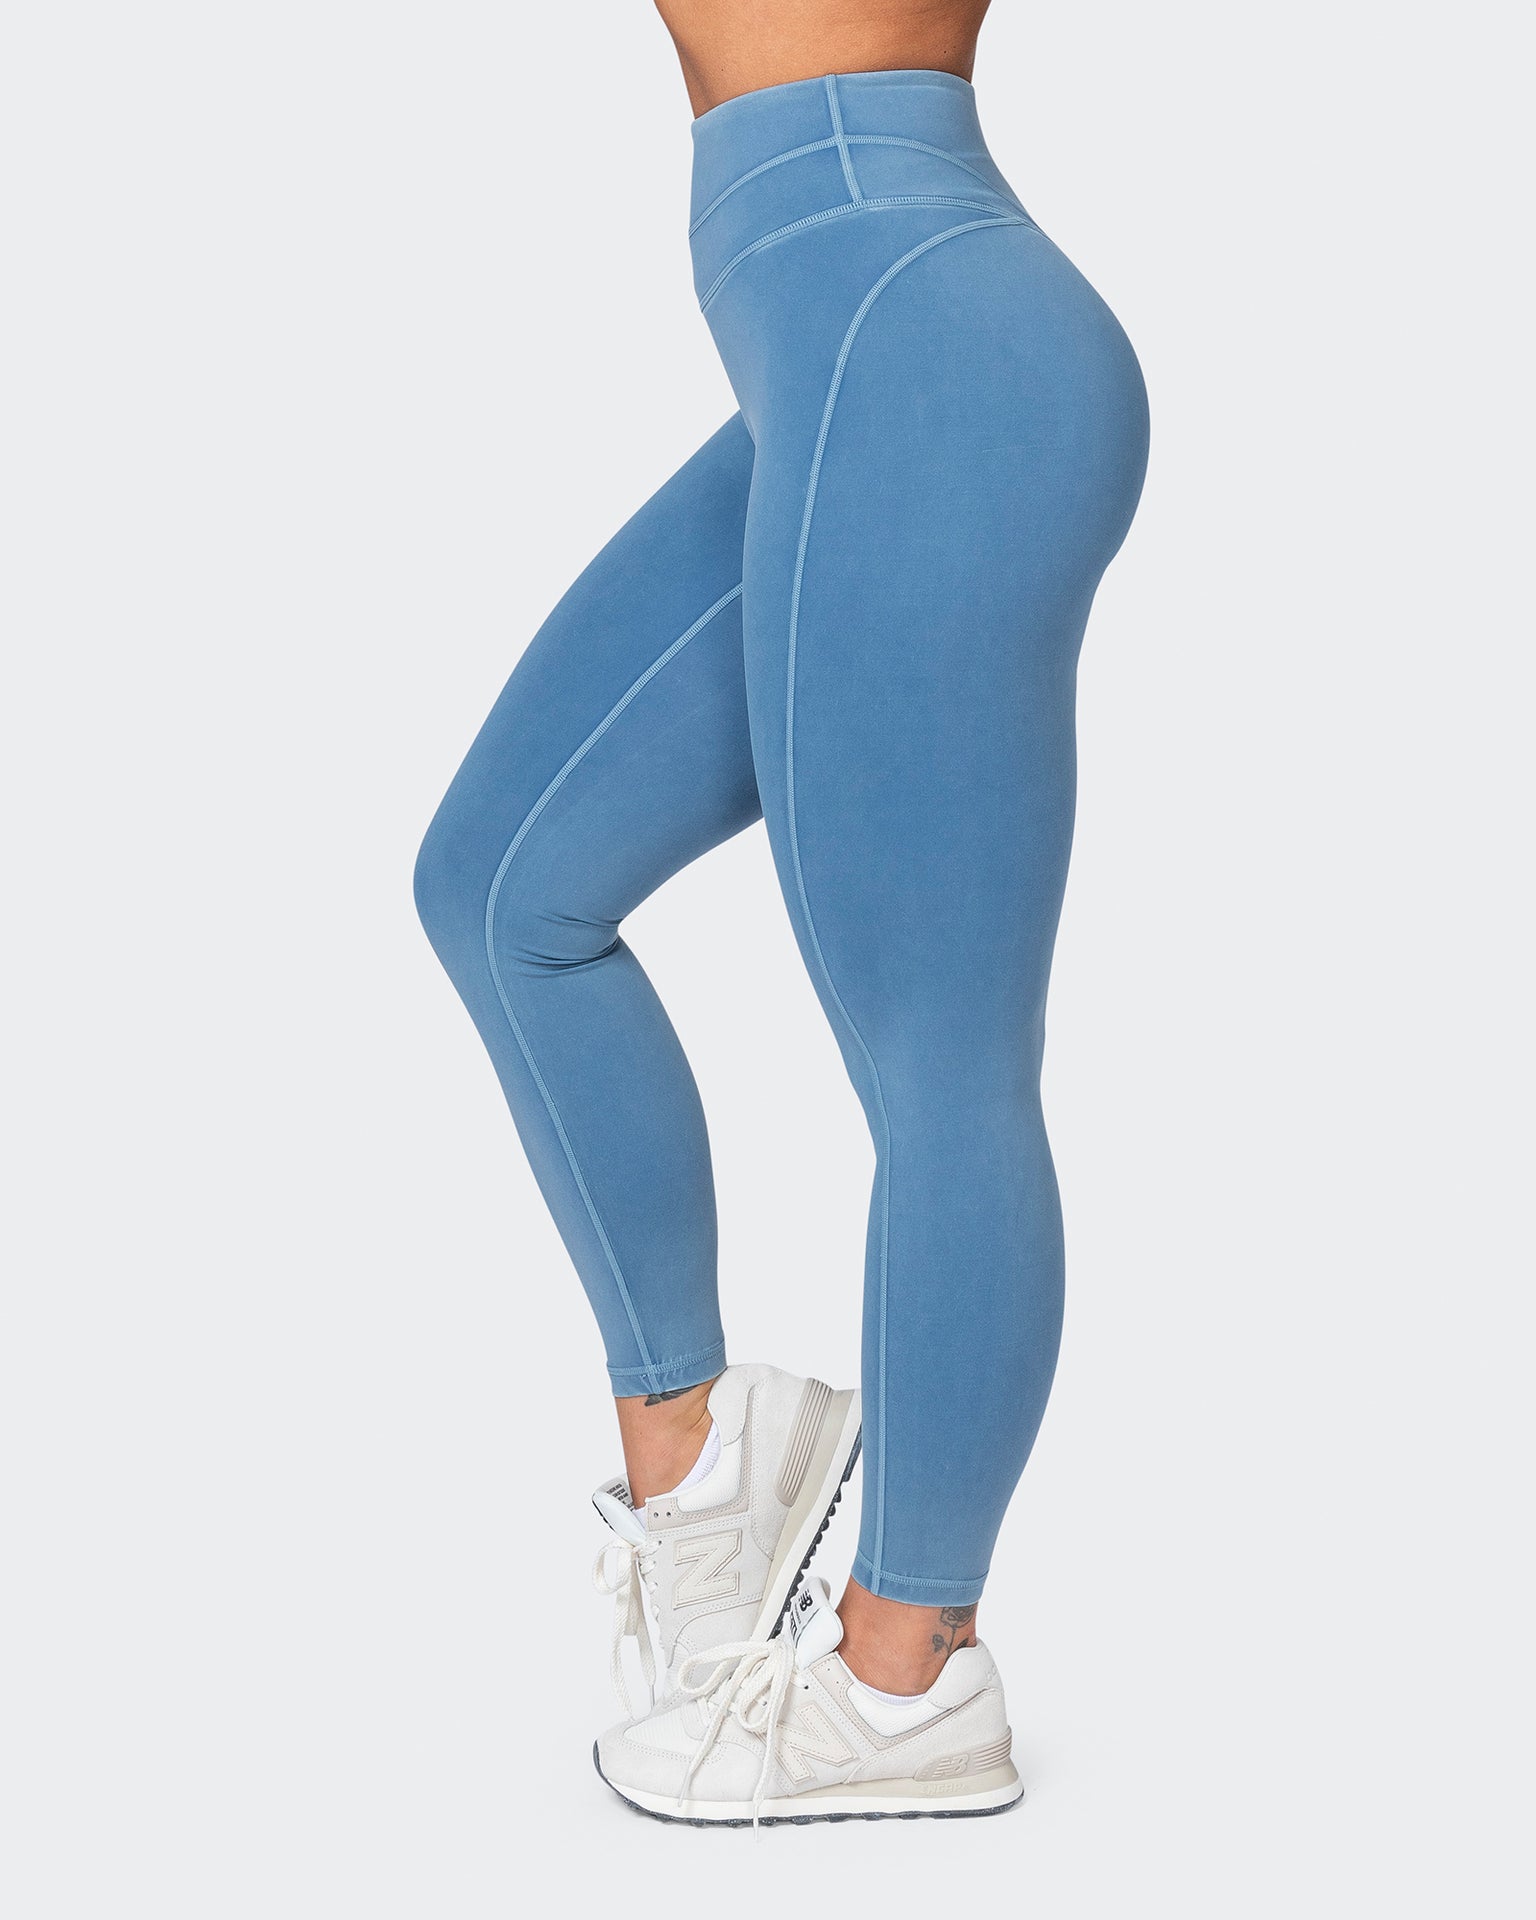 Muscle Nation Gym Leggings Second Skin Ankle Length Leggings - Washed High Tide